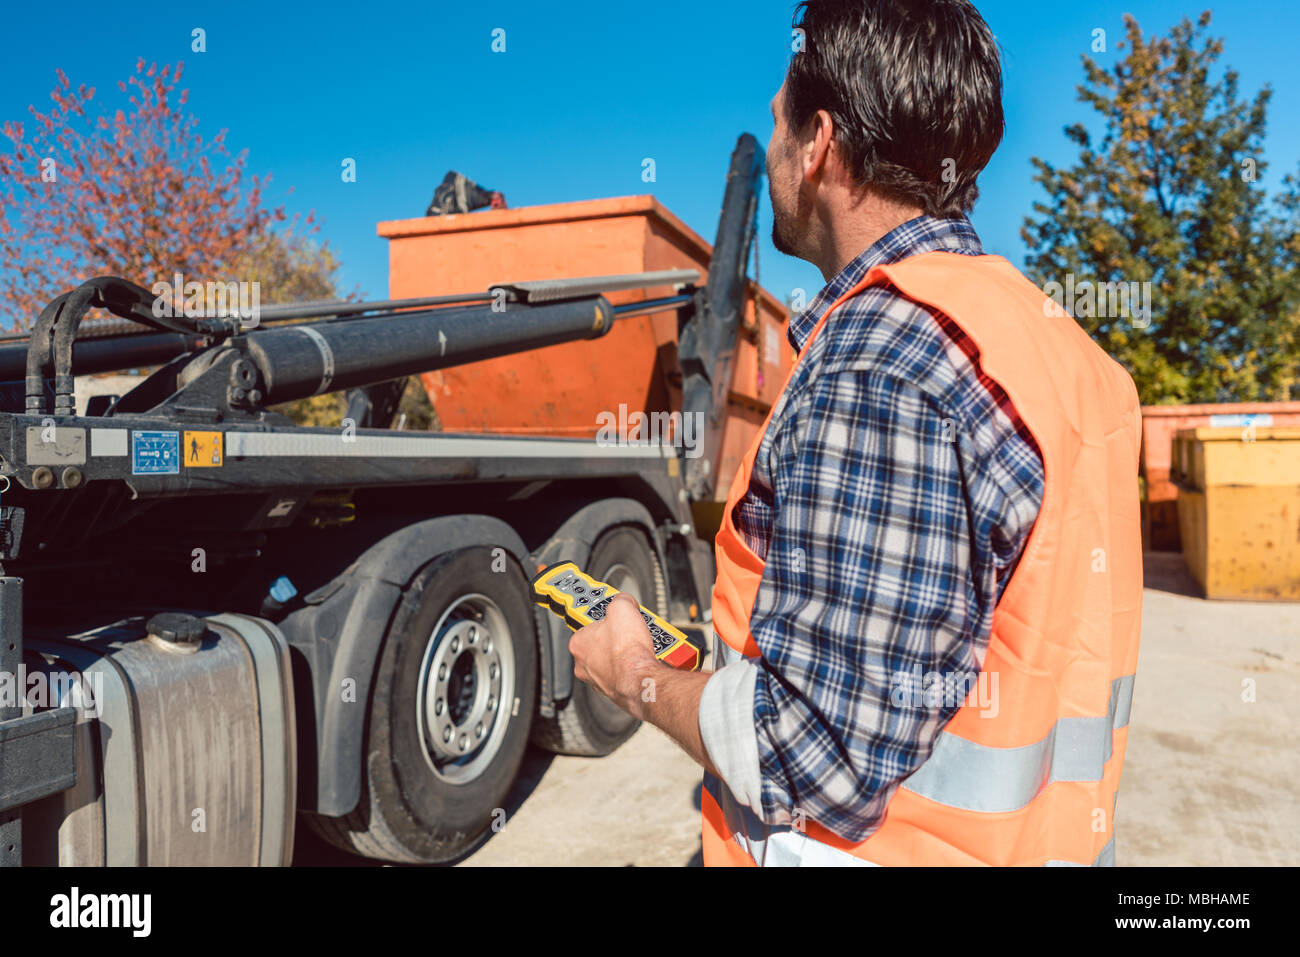 Worker On Construction Site Unloading Container For Waste From Truck Stock Photo Alamy